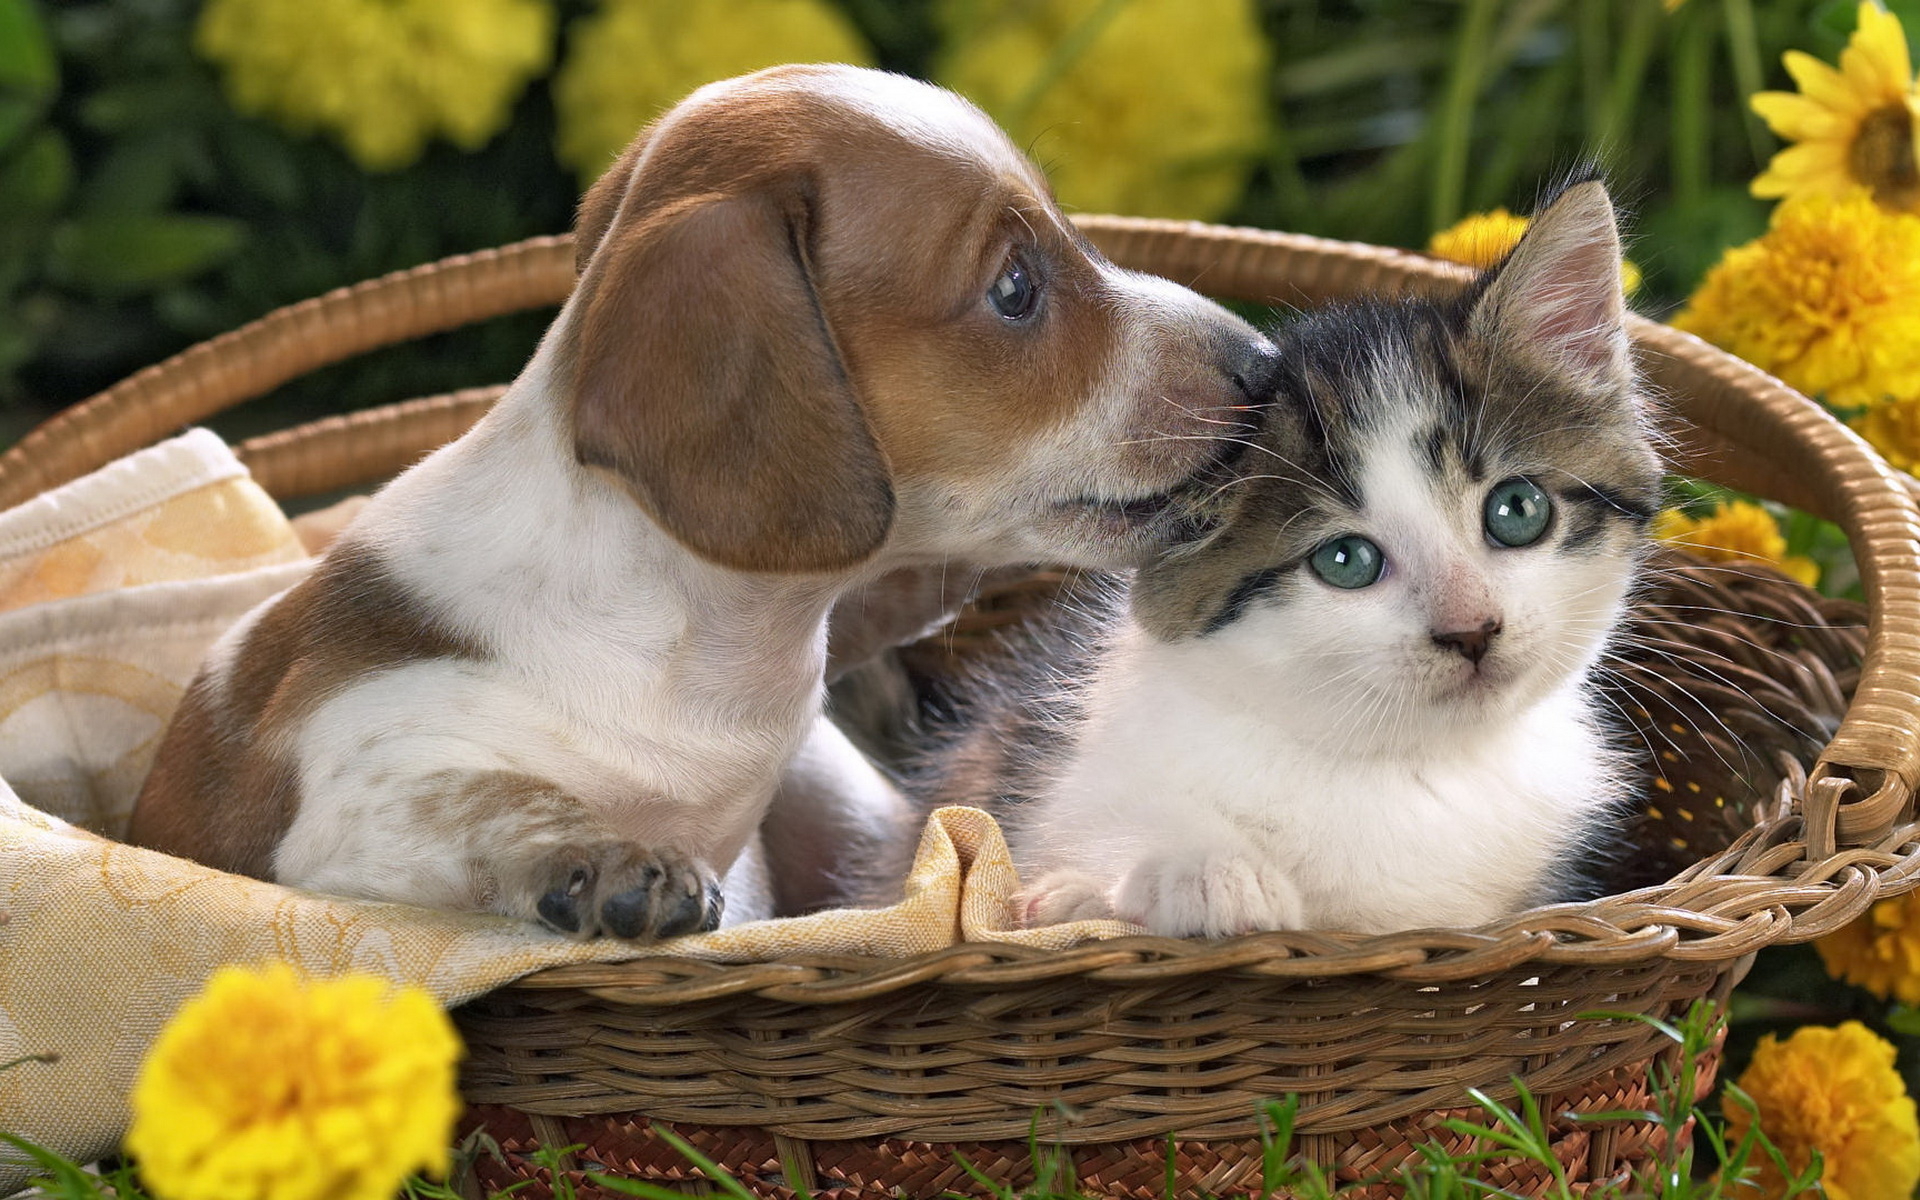 Puppy and kitten wallpapers and images - wallpapers ...